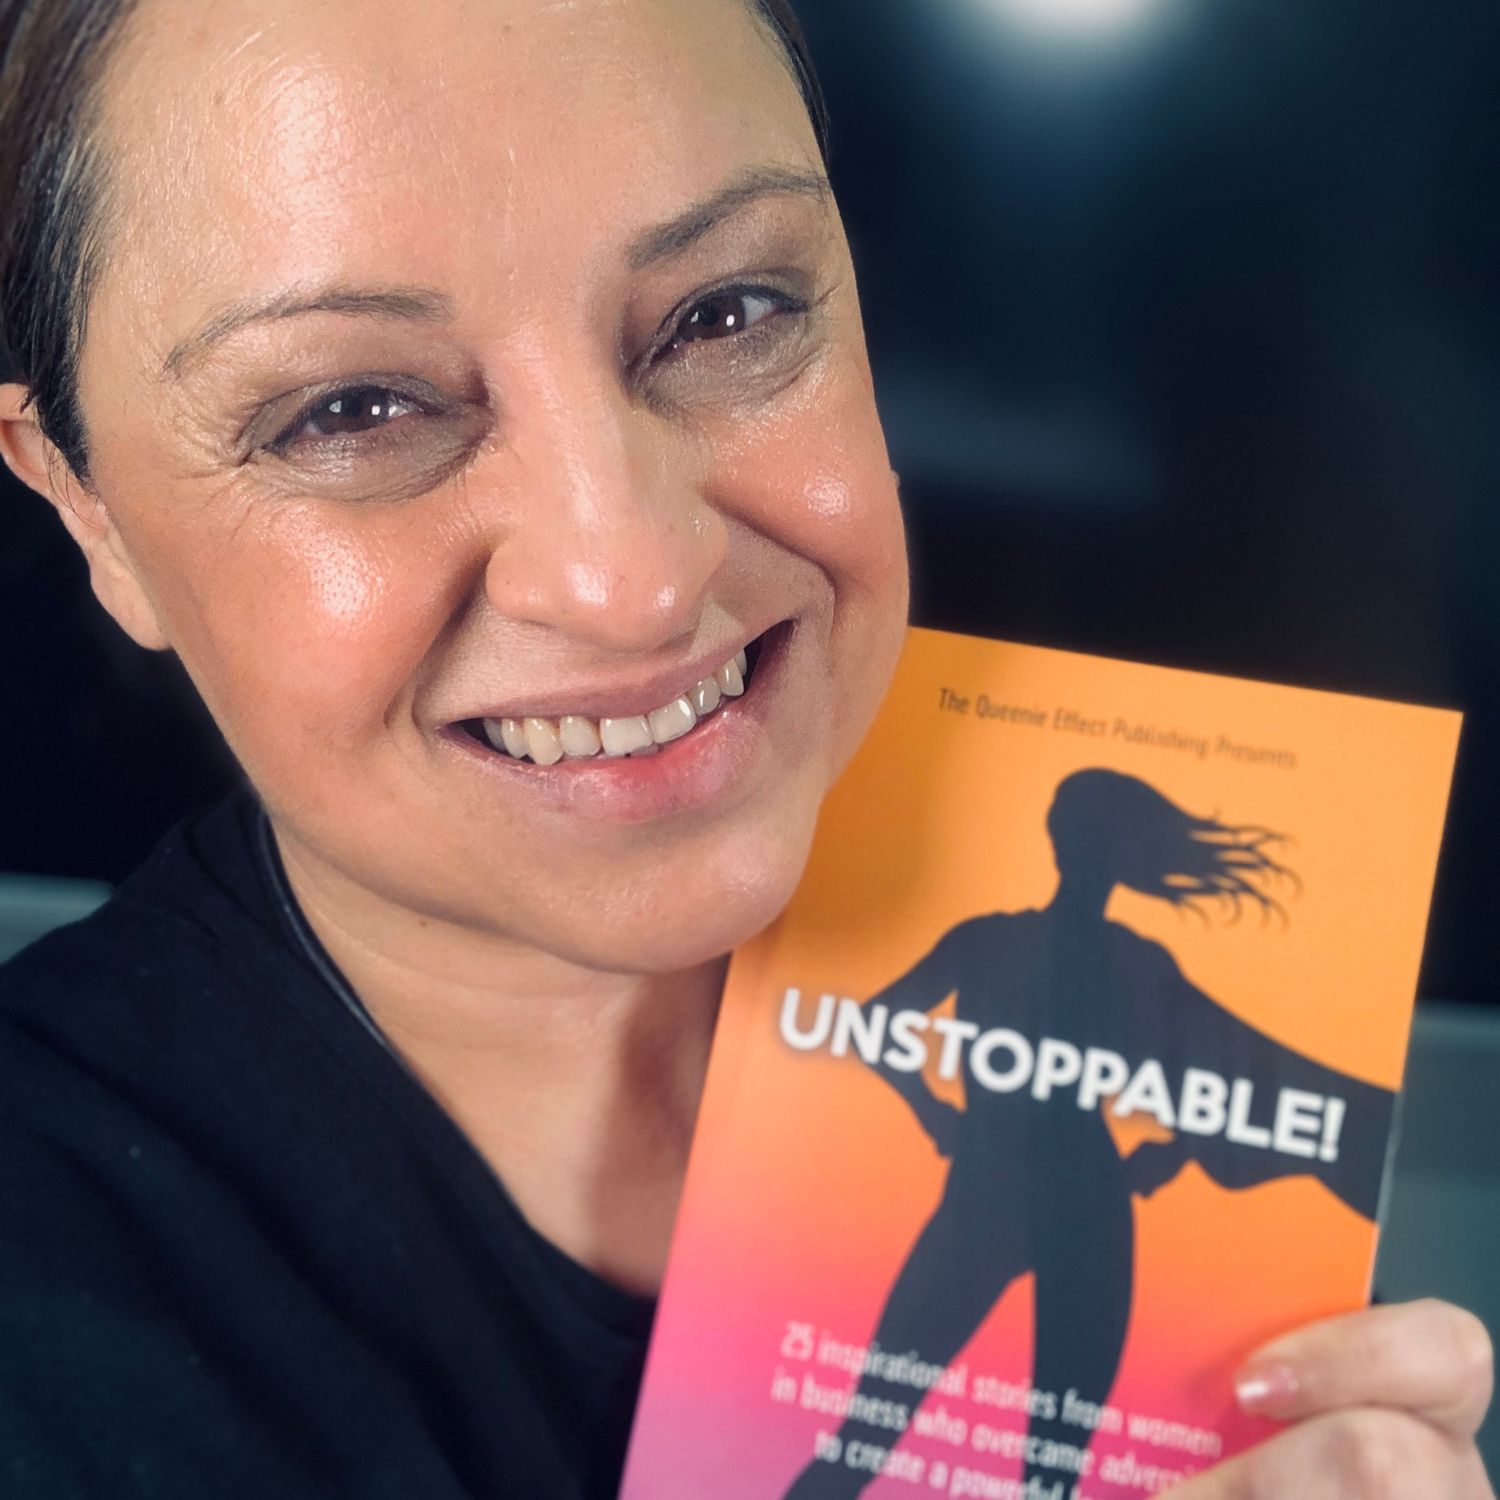 Unstoppable - High Performance Coaching